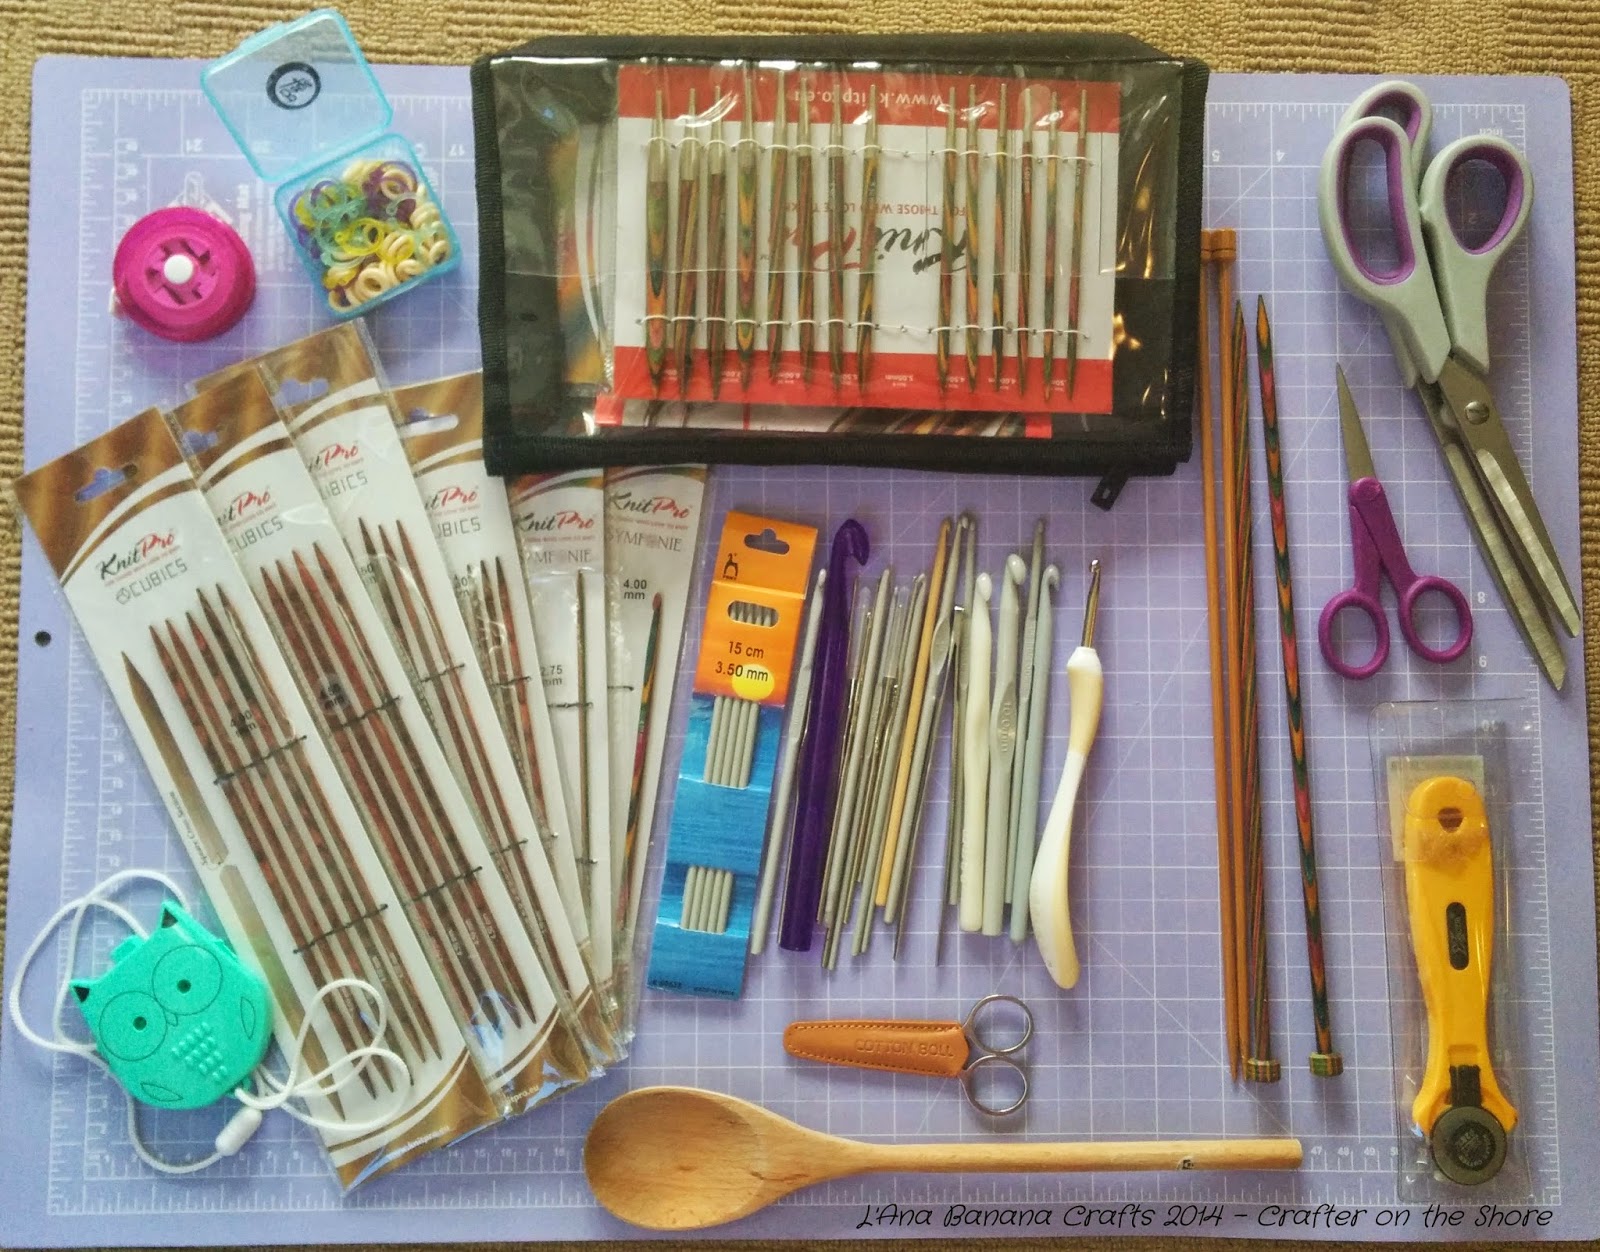 Crafter on the Shore: Stocking up for Winter - Part 2: Tools